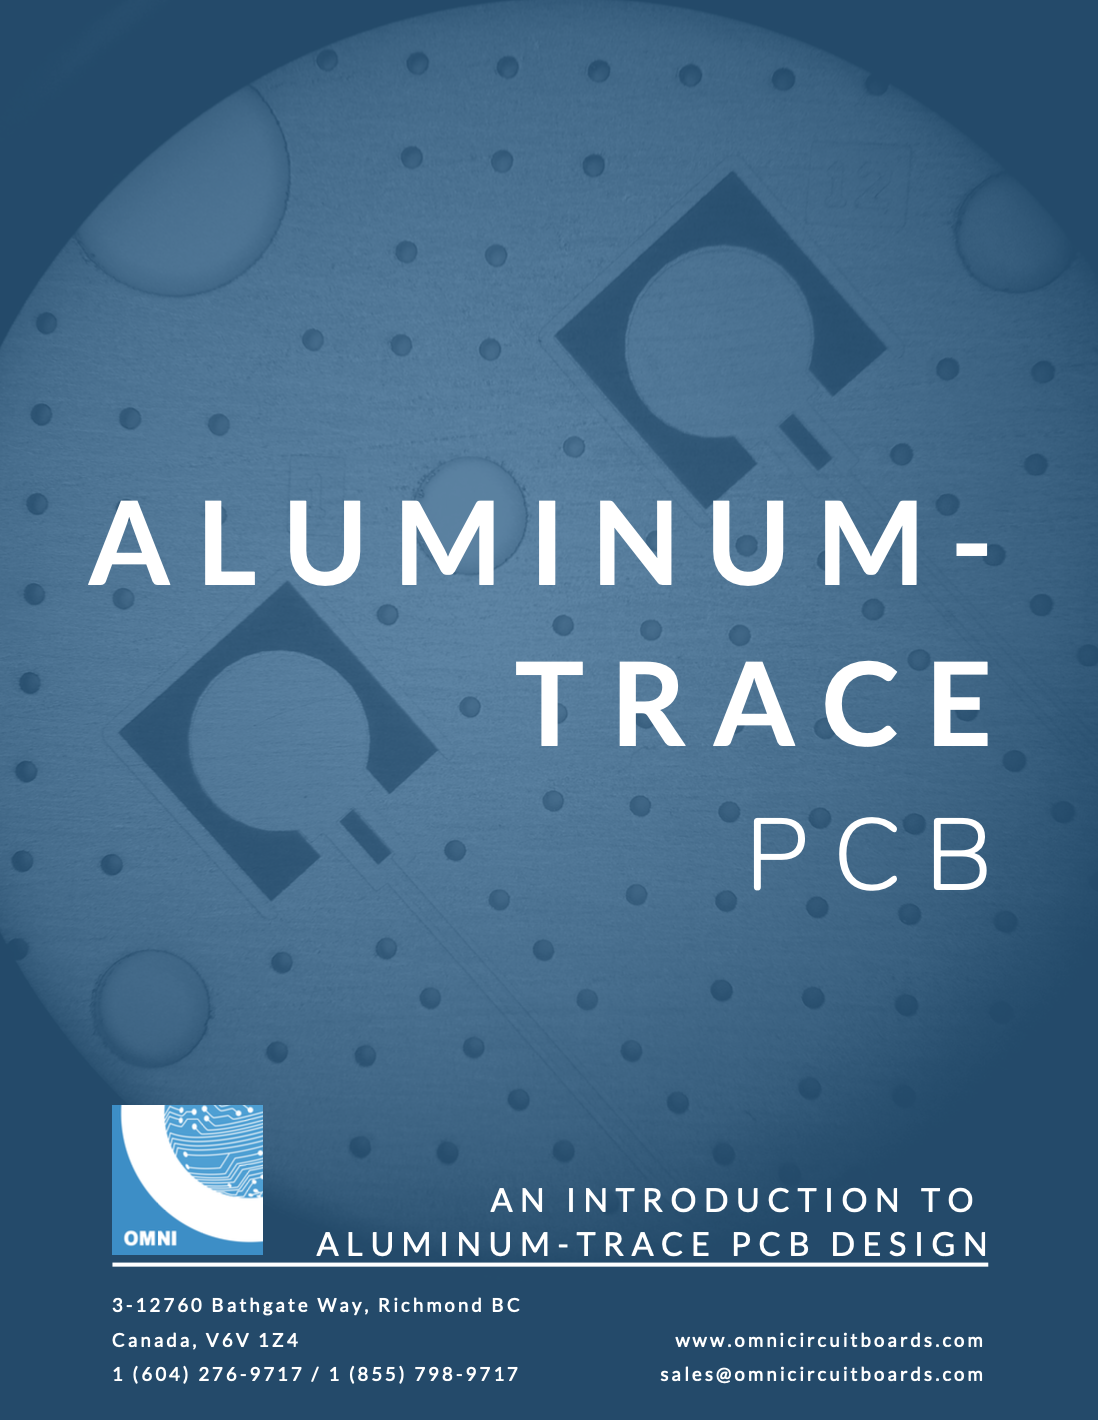 An Introduction to Aluminum-Trace PCB Design 2021